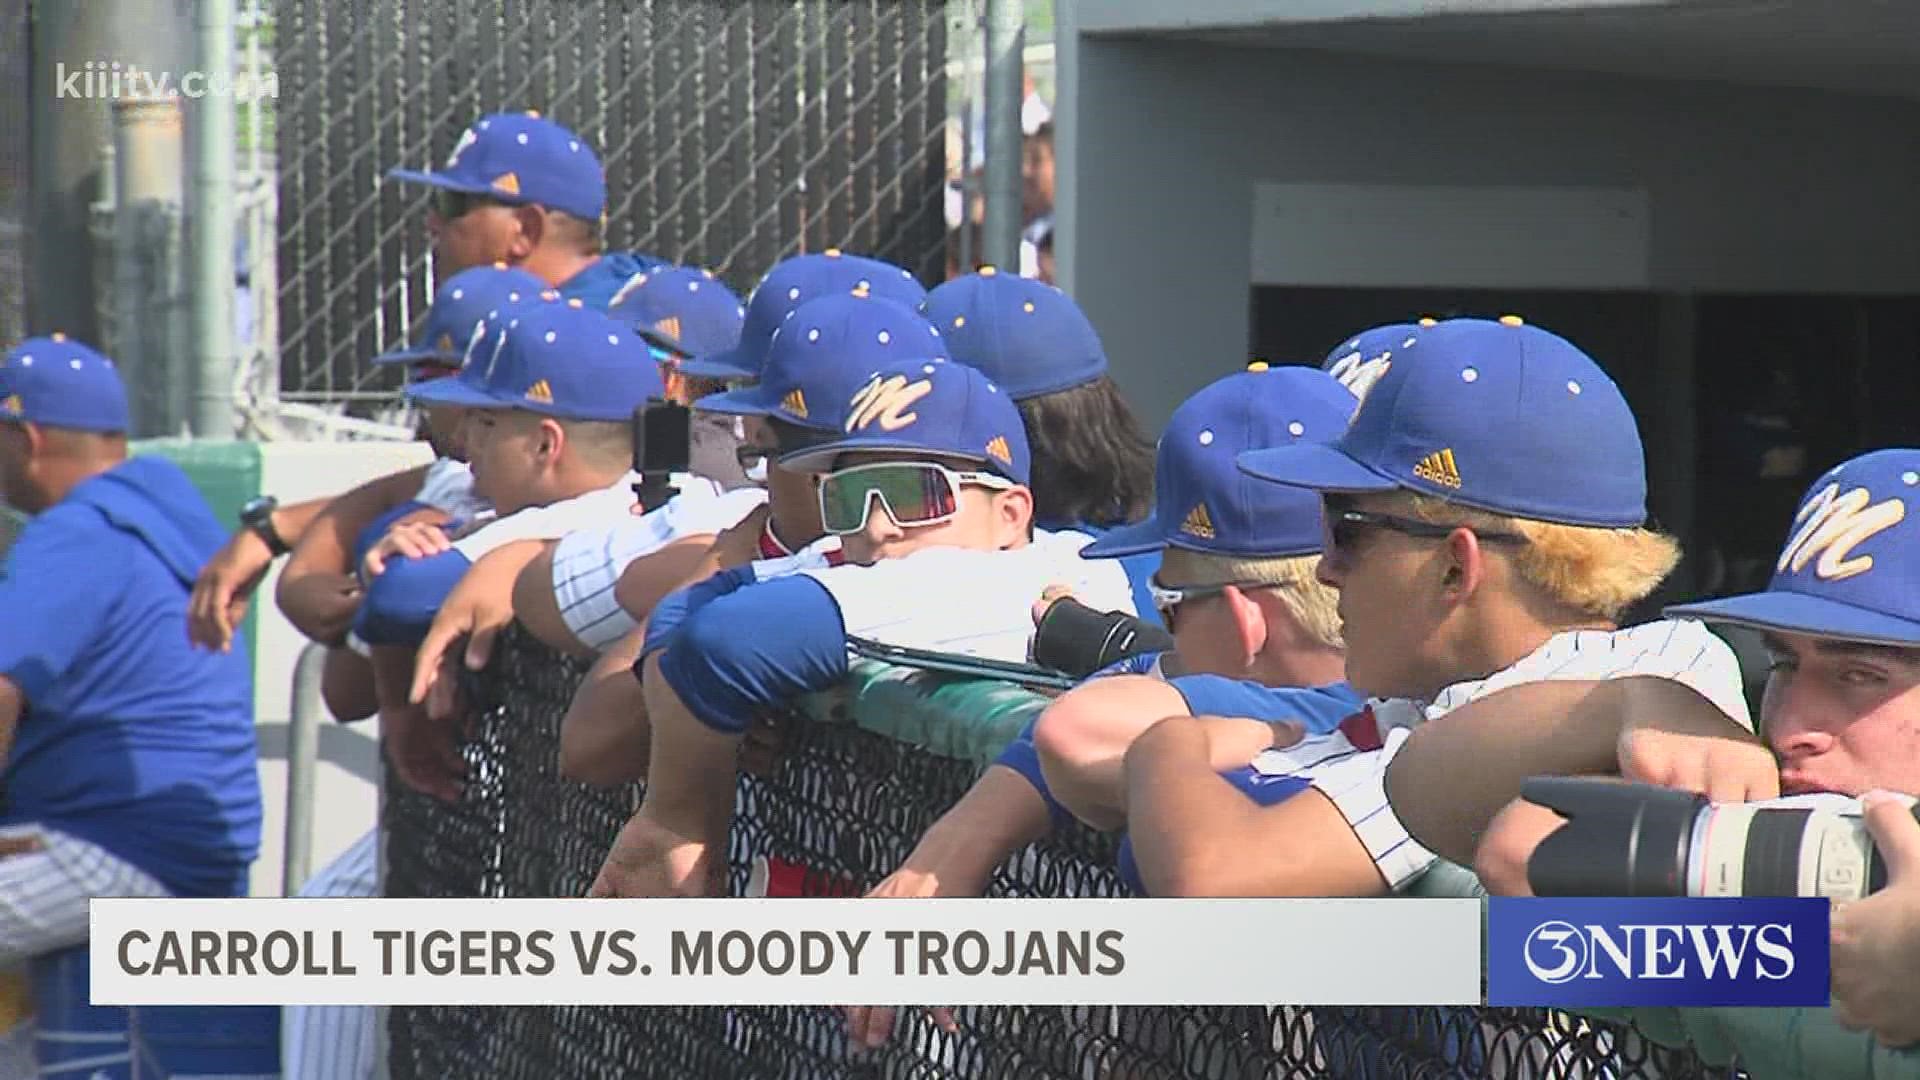 Moody would win 5-4 in nine innings and will face Roma in the first round. Carroll drops to the #4 seed and draws La Joya Palmview.